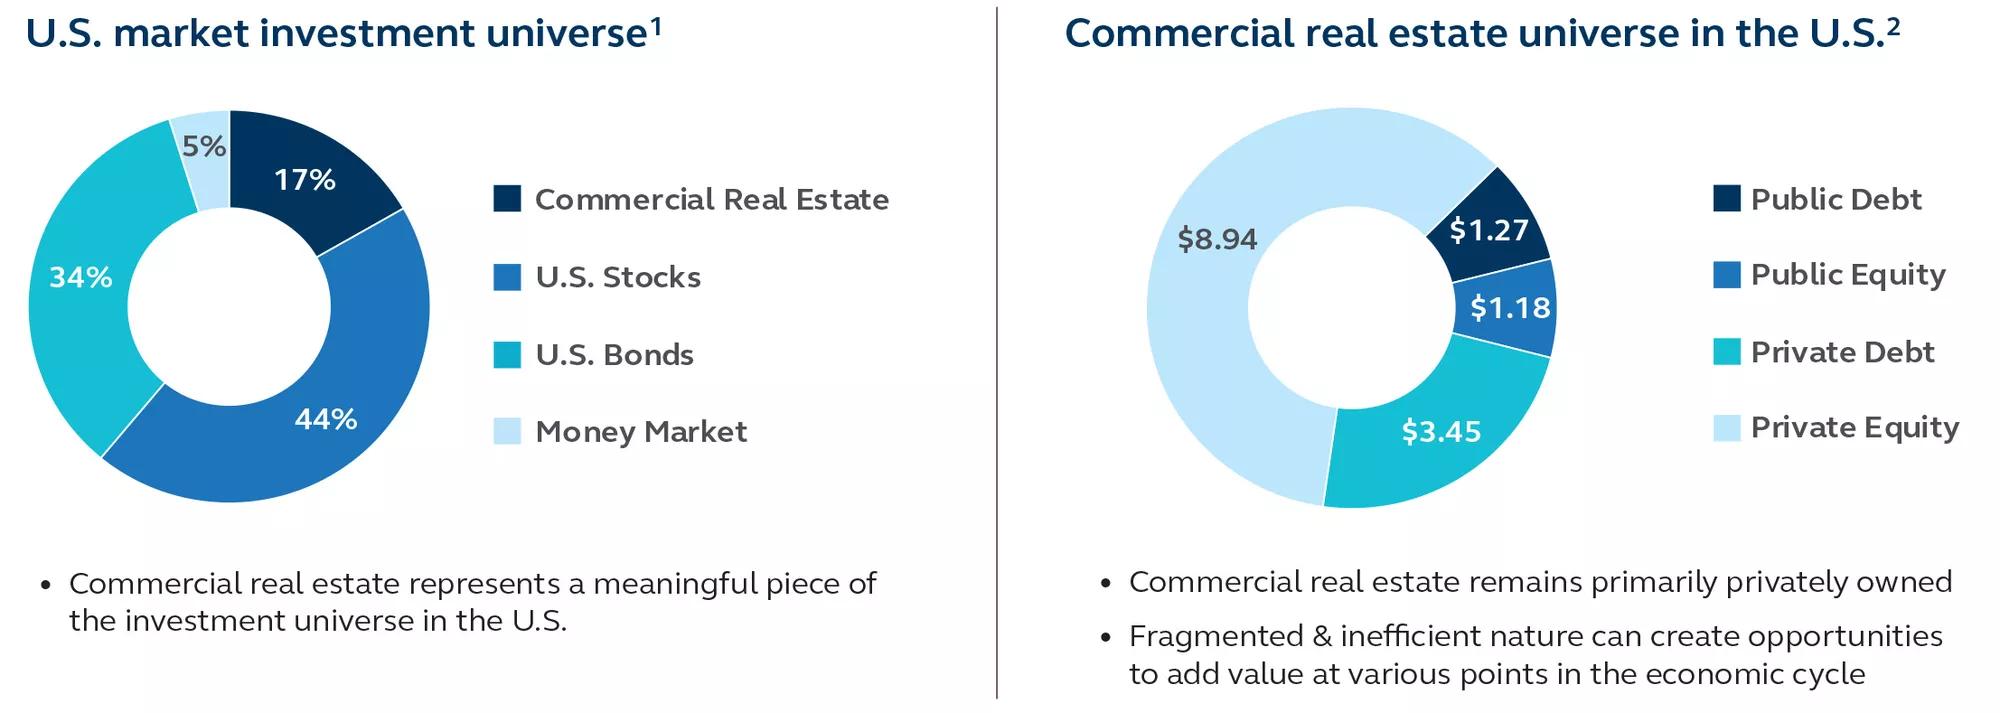 One pie charts shows the percentage of the U.S. market by sector and another pie chart shows commercial real estate percentage by quadrant